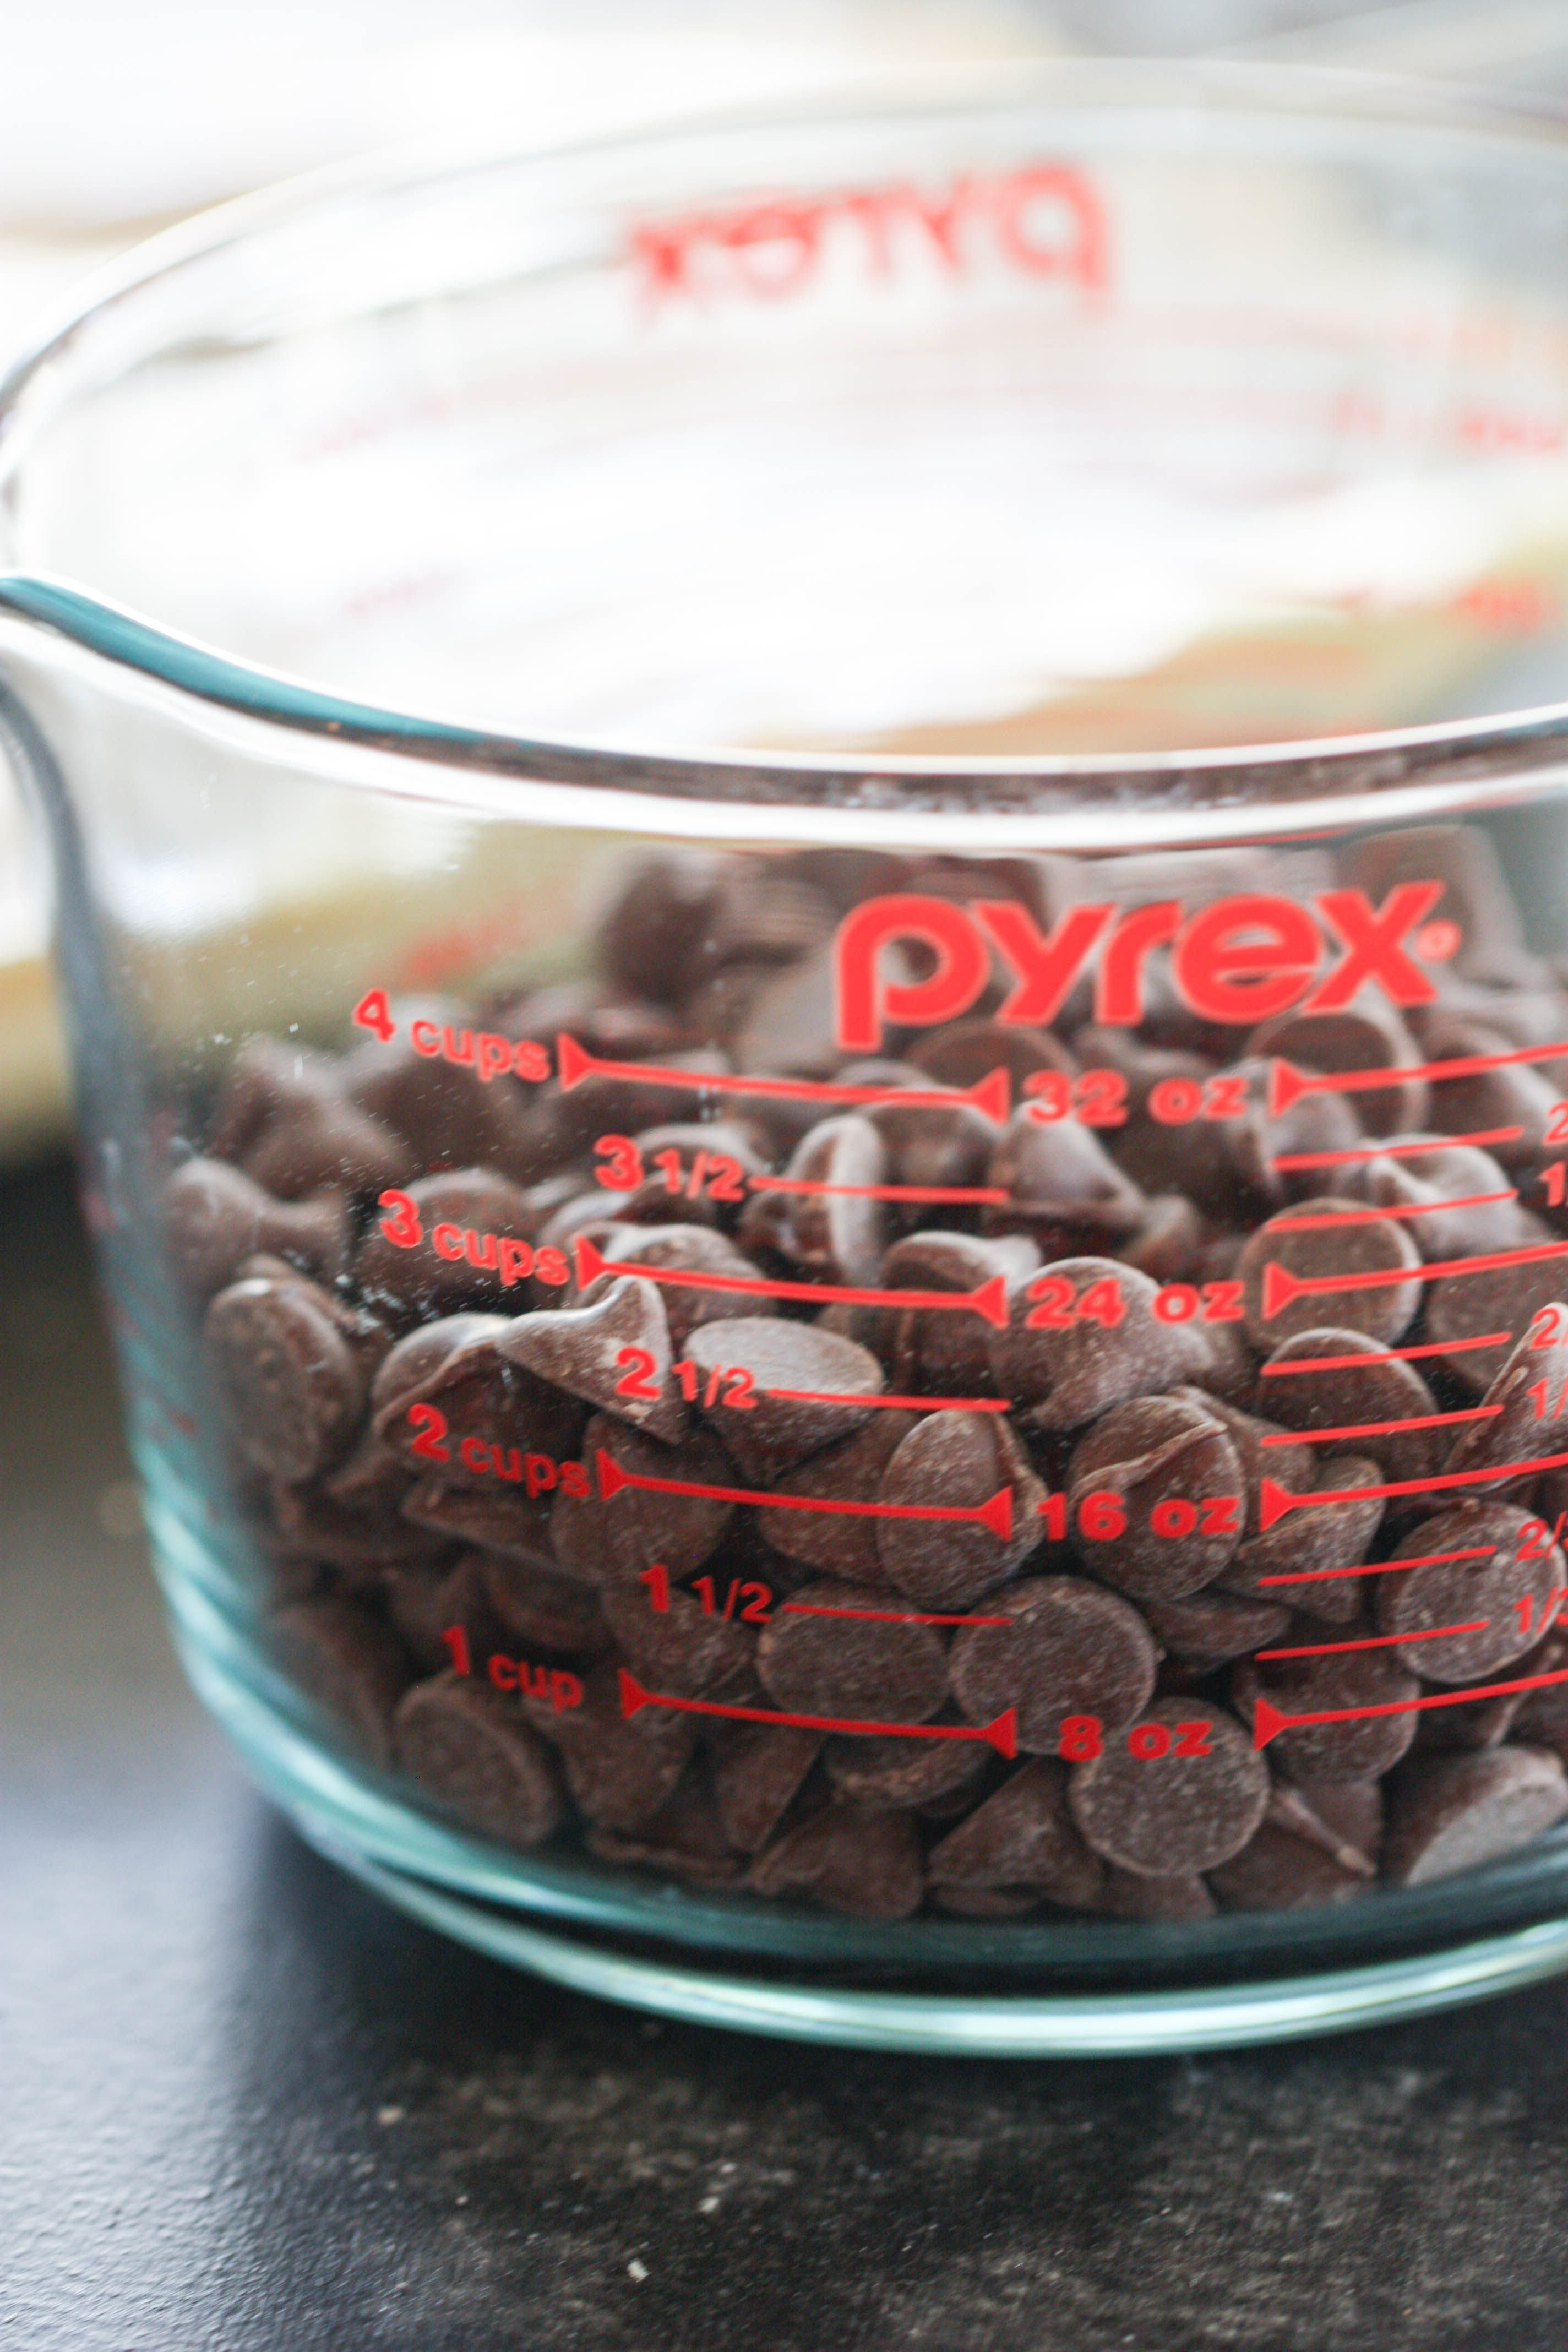 Chocolate chips in a pyrex measuring cup